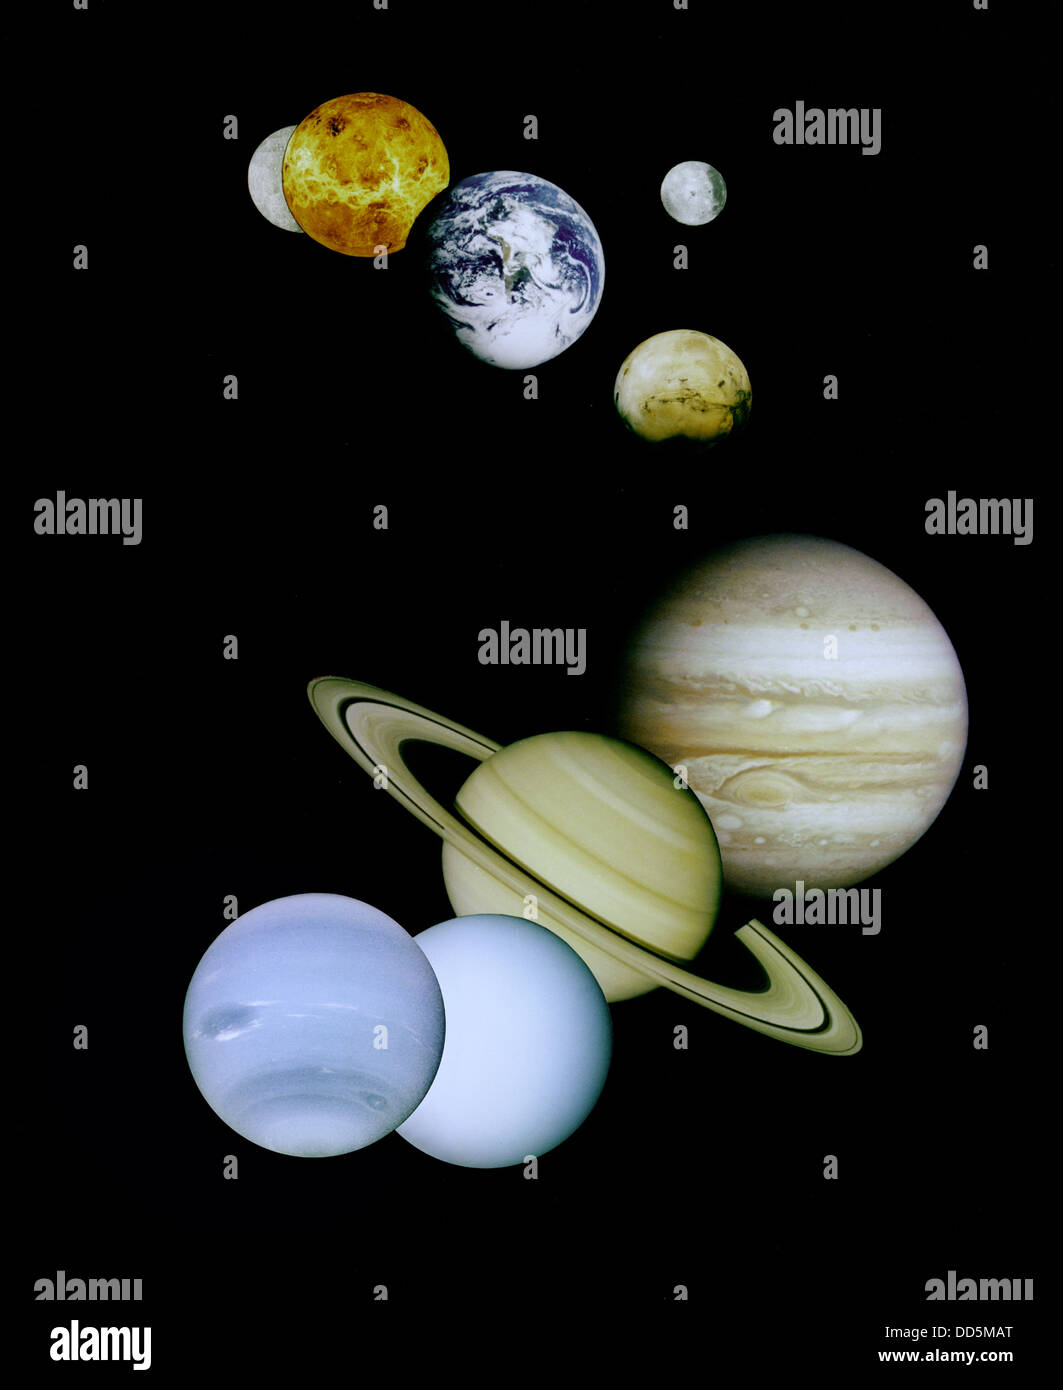 Solar System or Planetary System Stock Photo